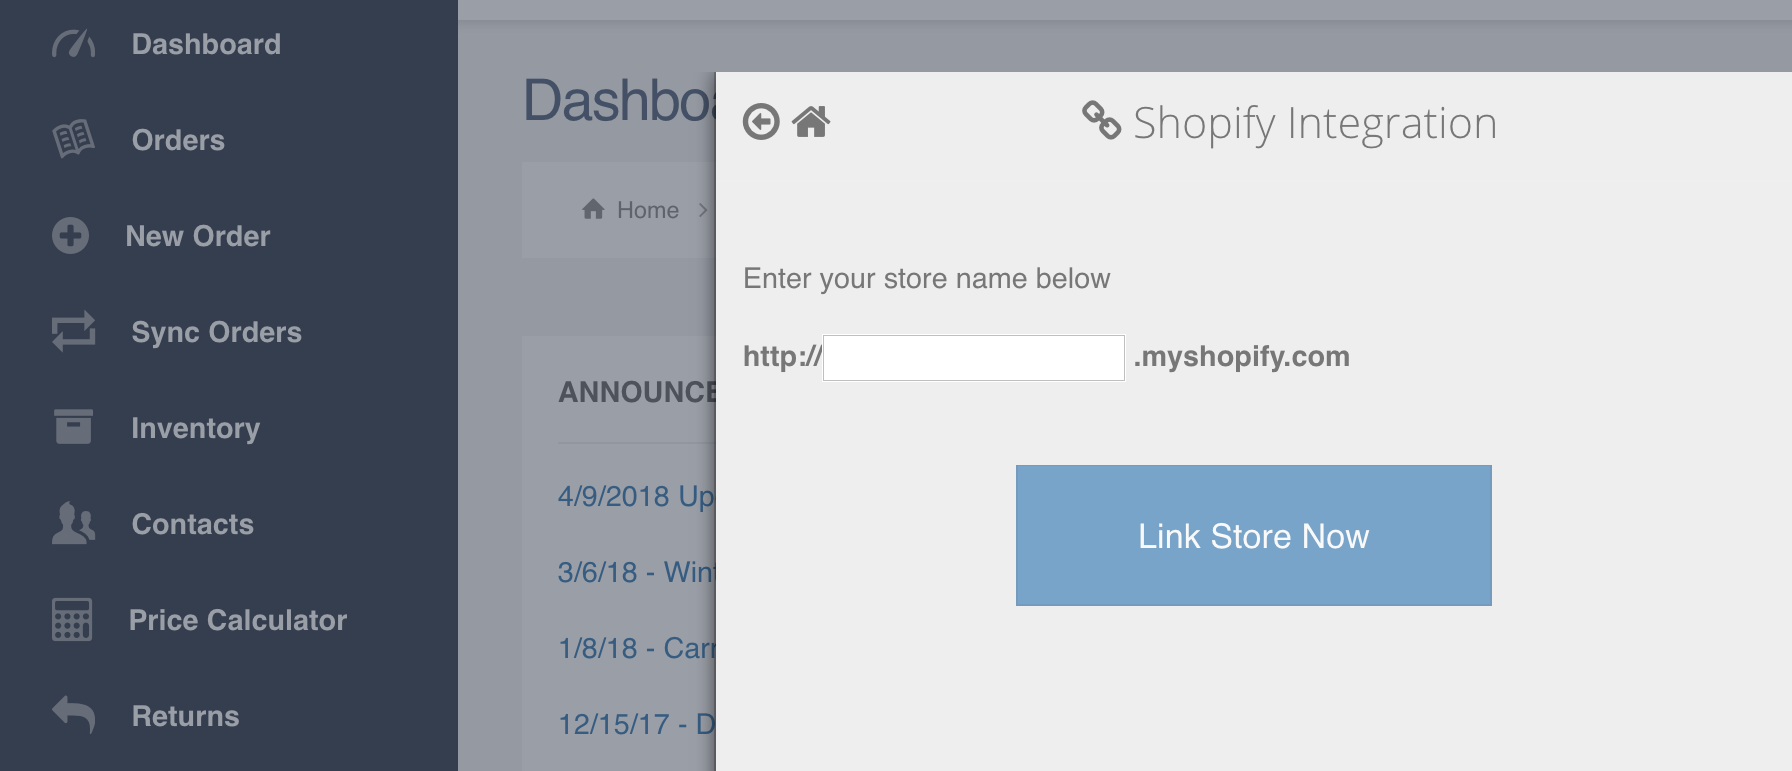 shopify integration connect to shipbob fulfillment 3pl